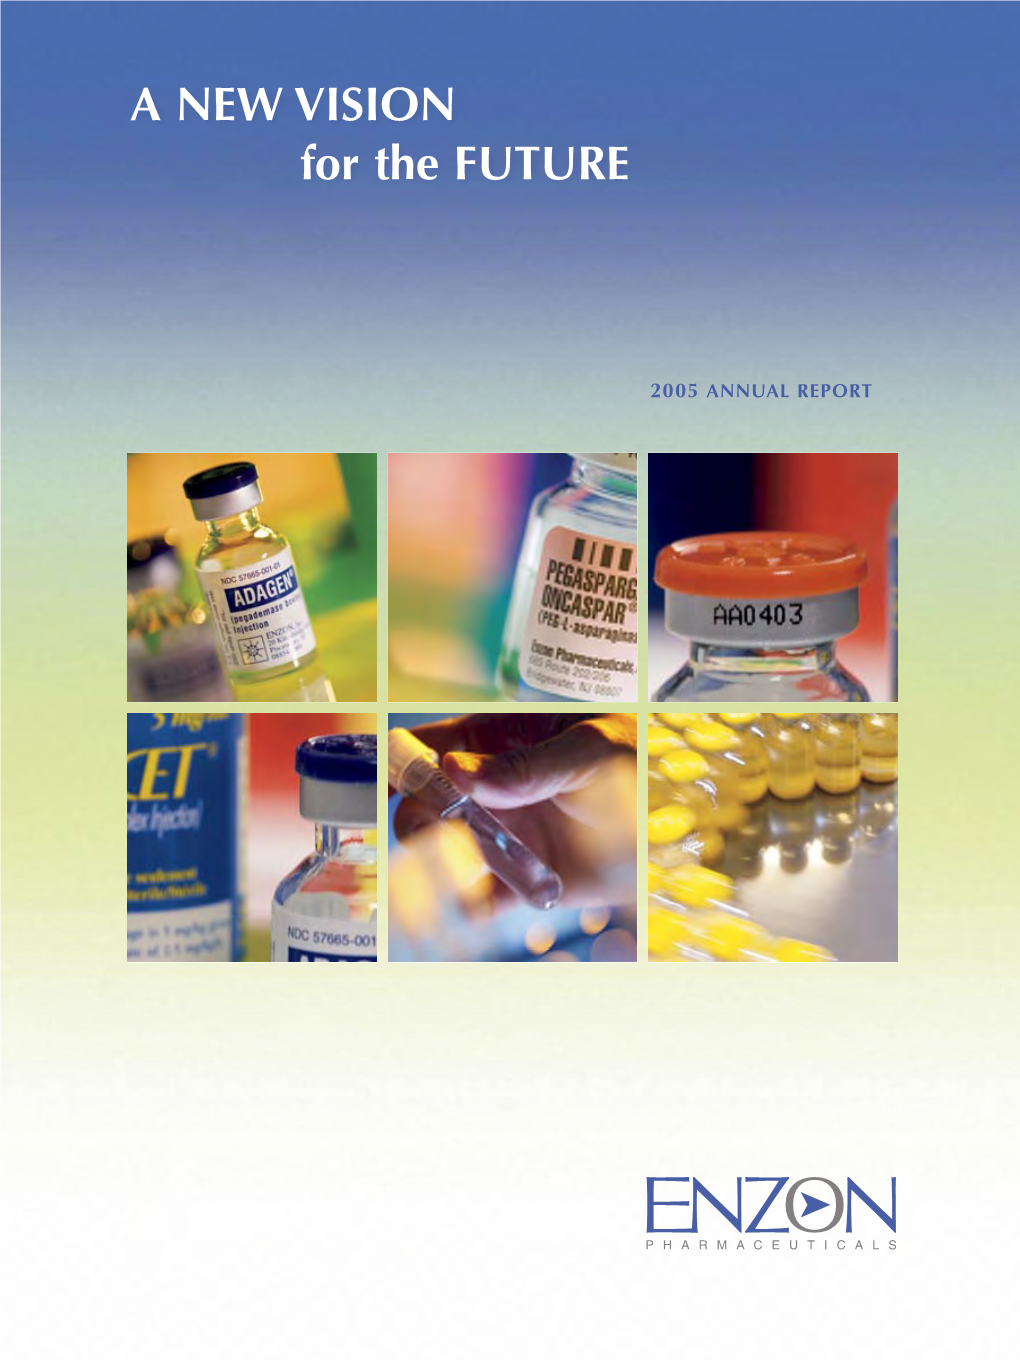 Enzon Pharmaceuticals Is a Bio- Designed to Release Compounds At